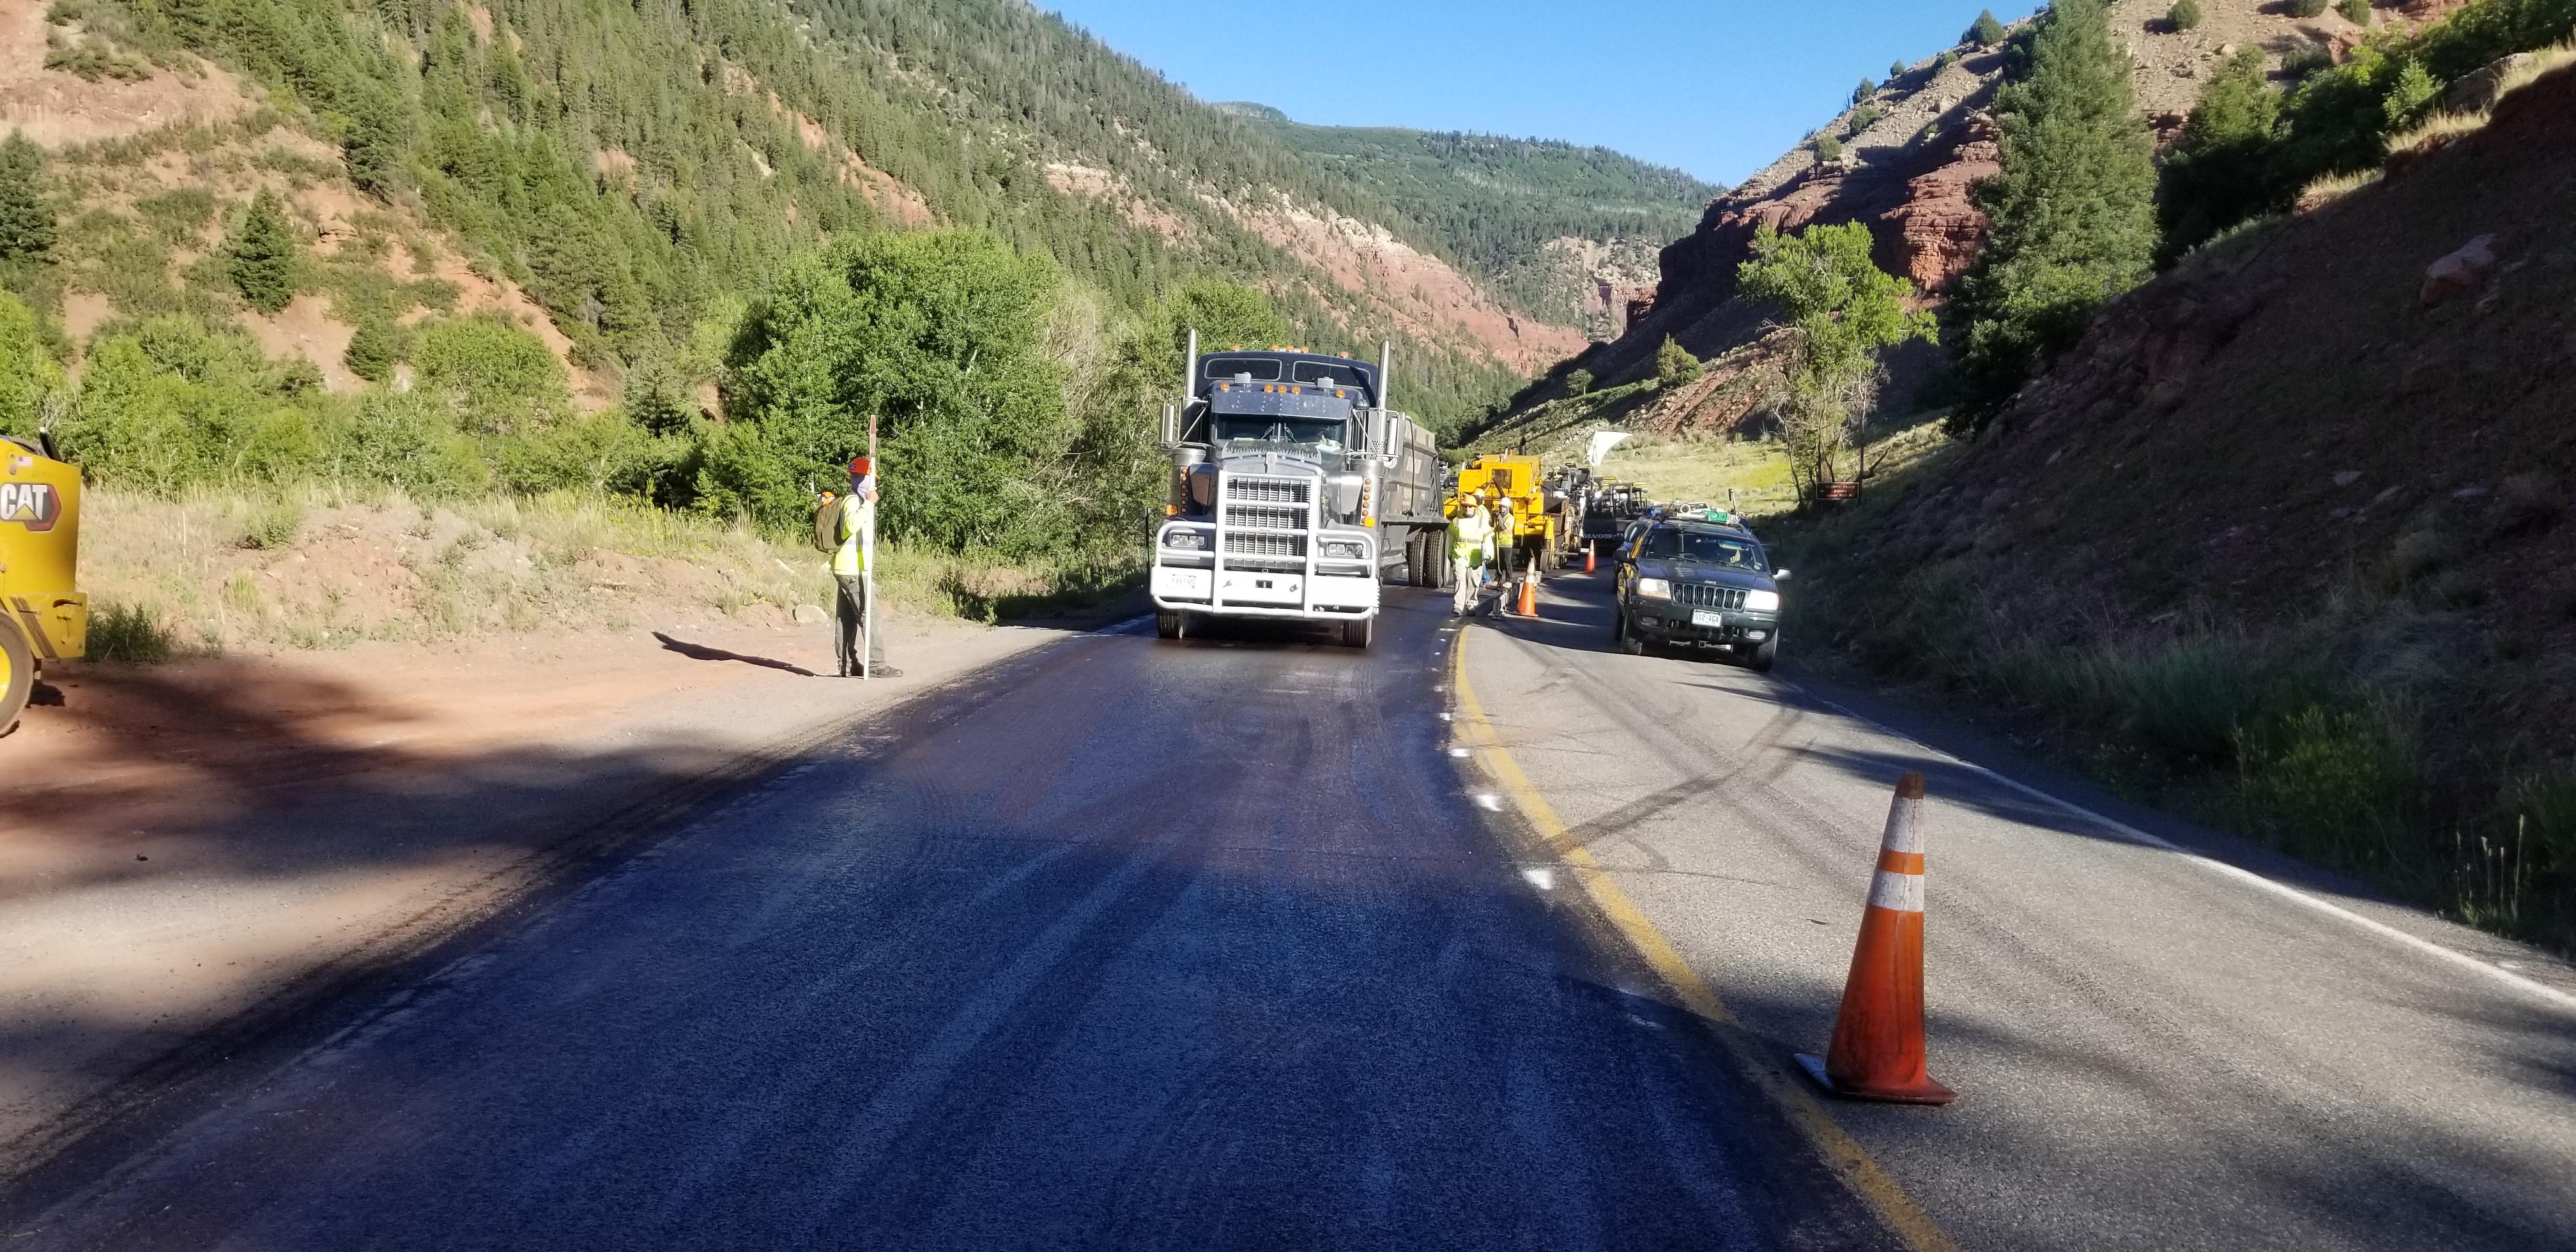 CO 145 road work - allowing semi to pass detail image